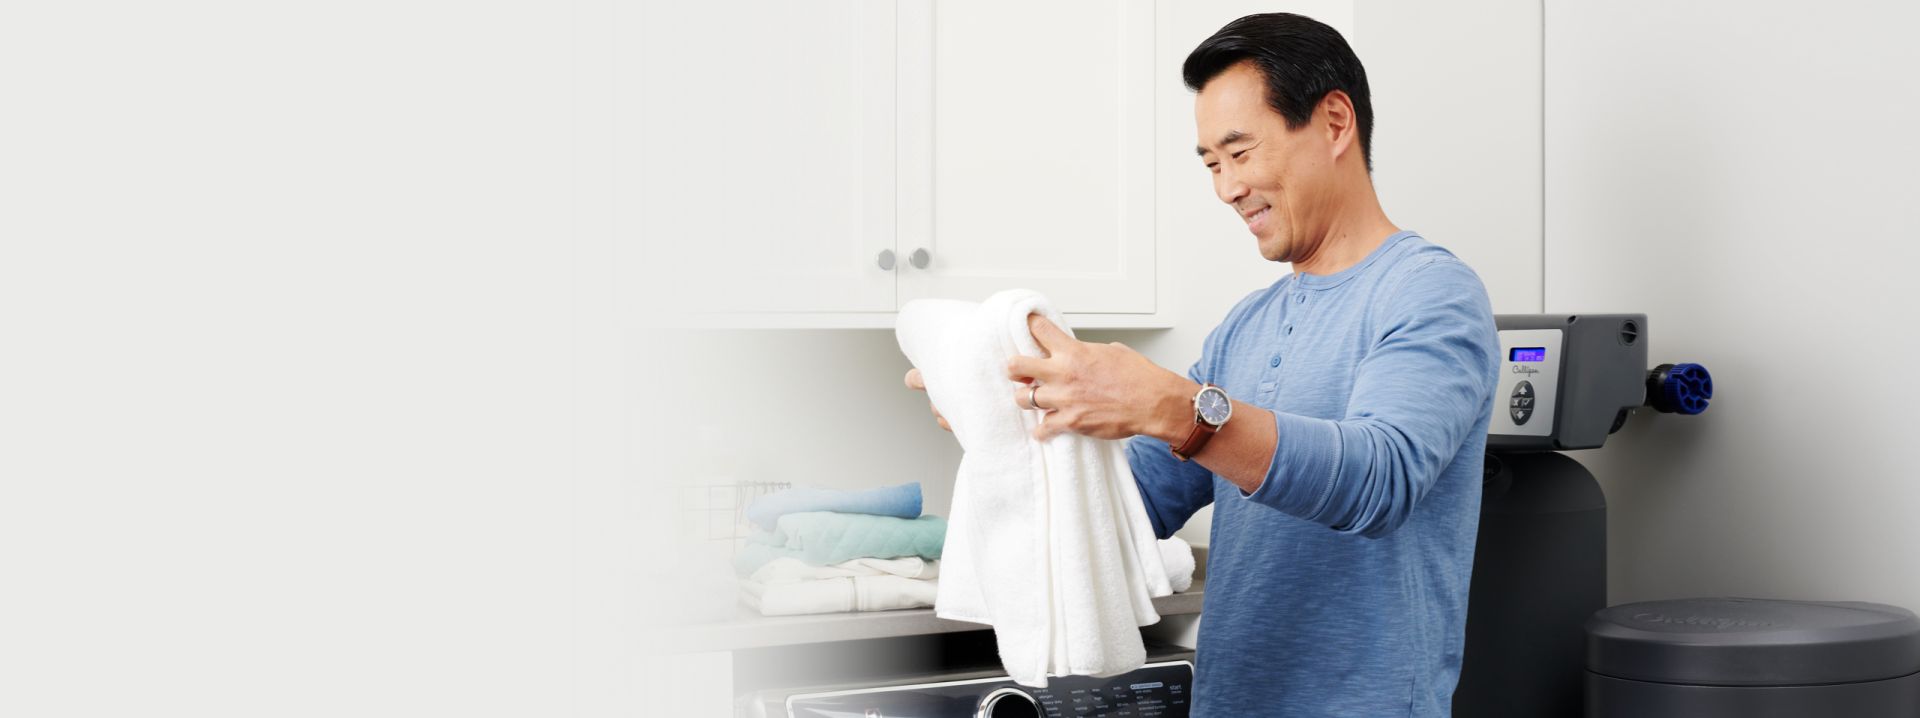 Man doing laundry using a soft water system